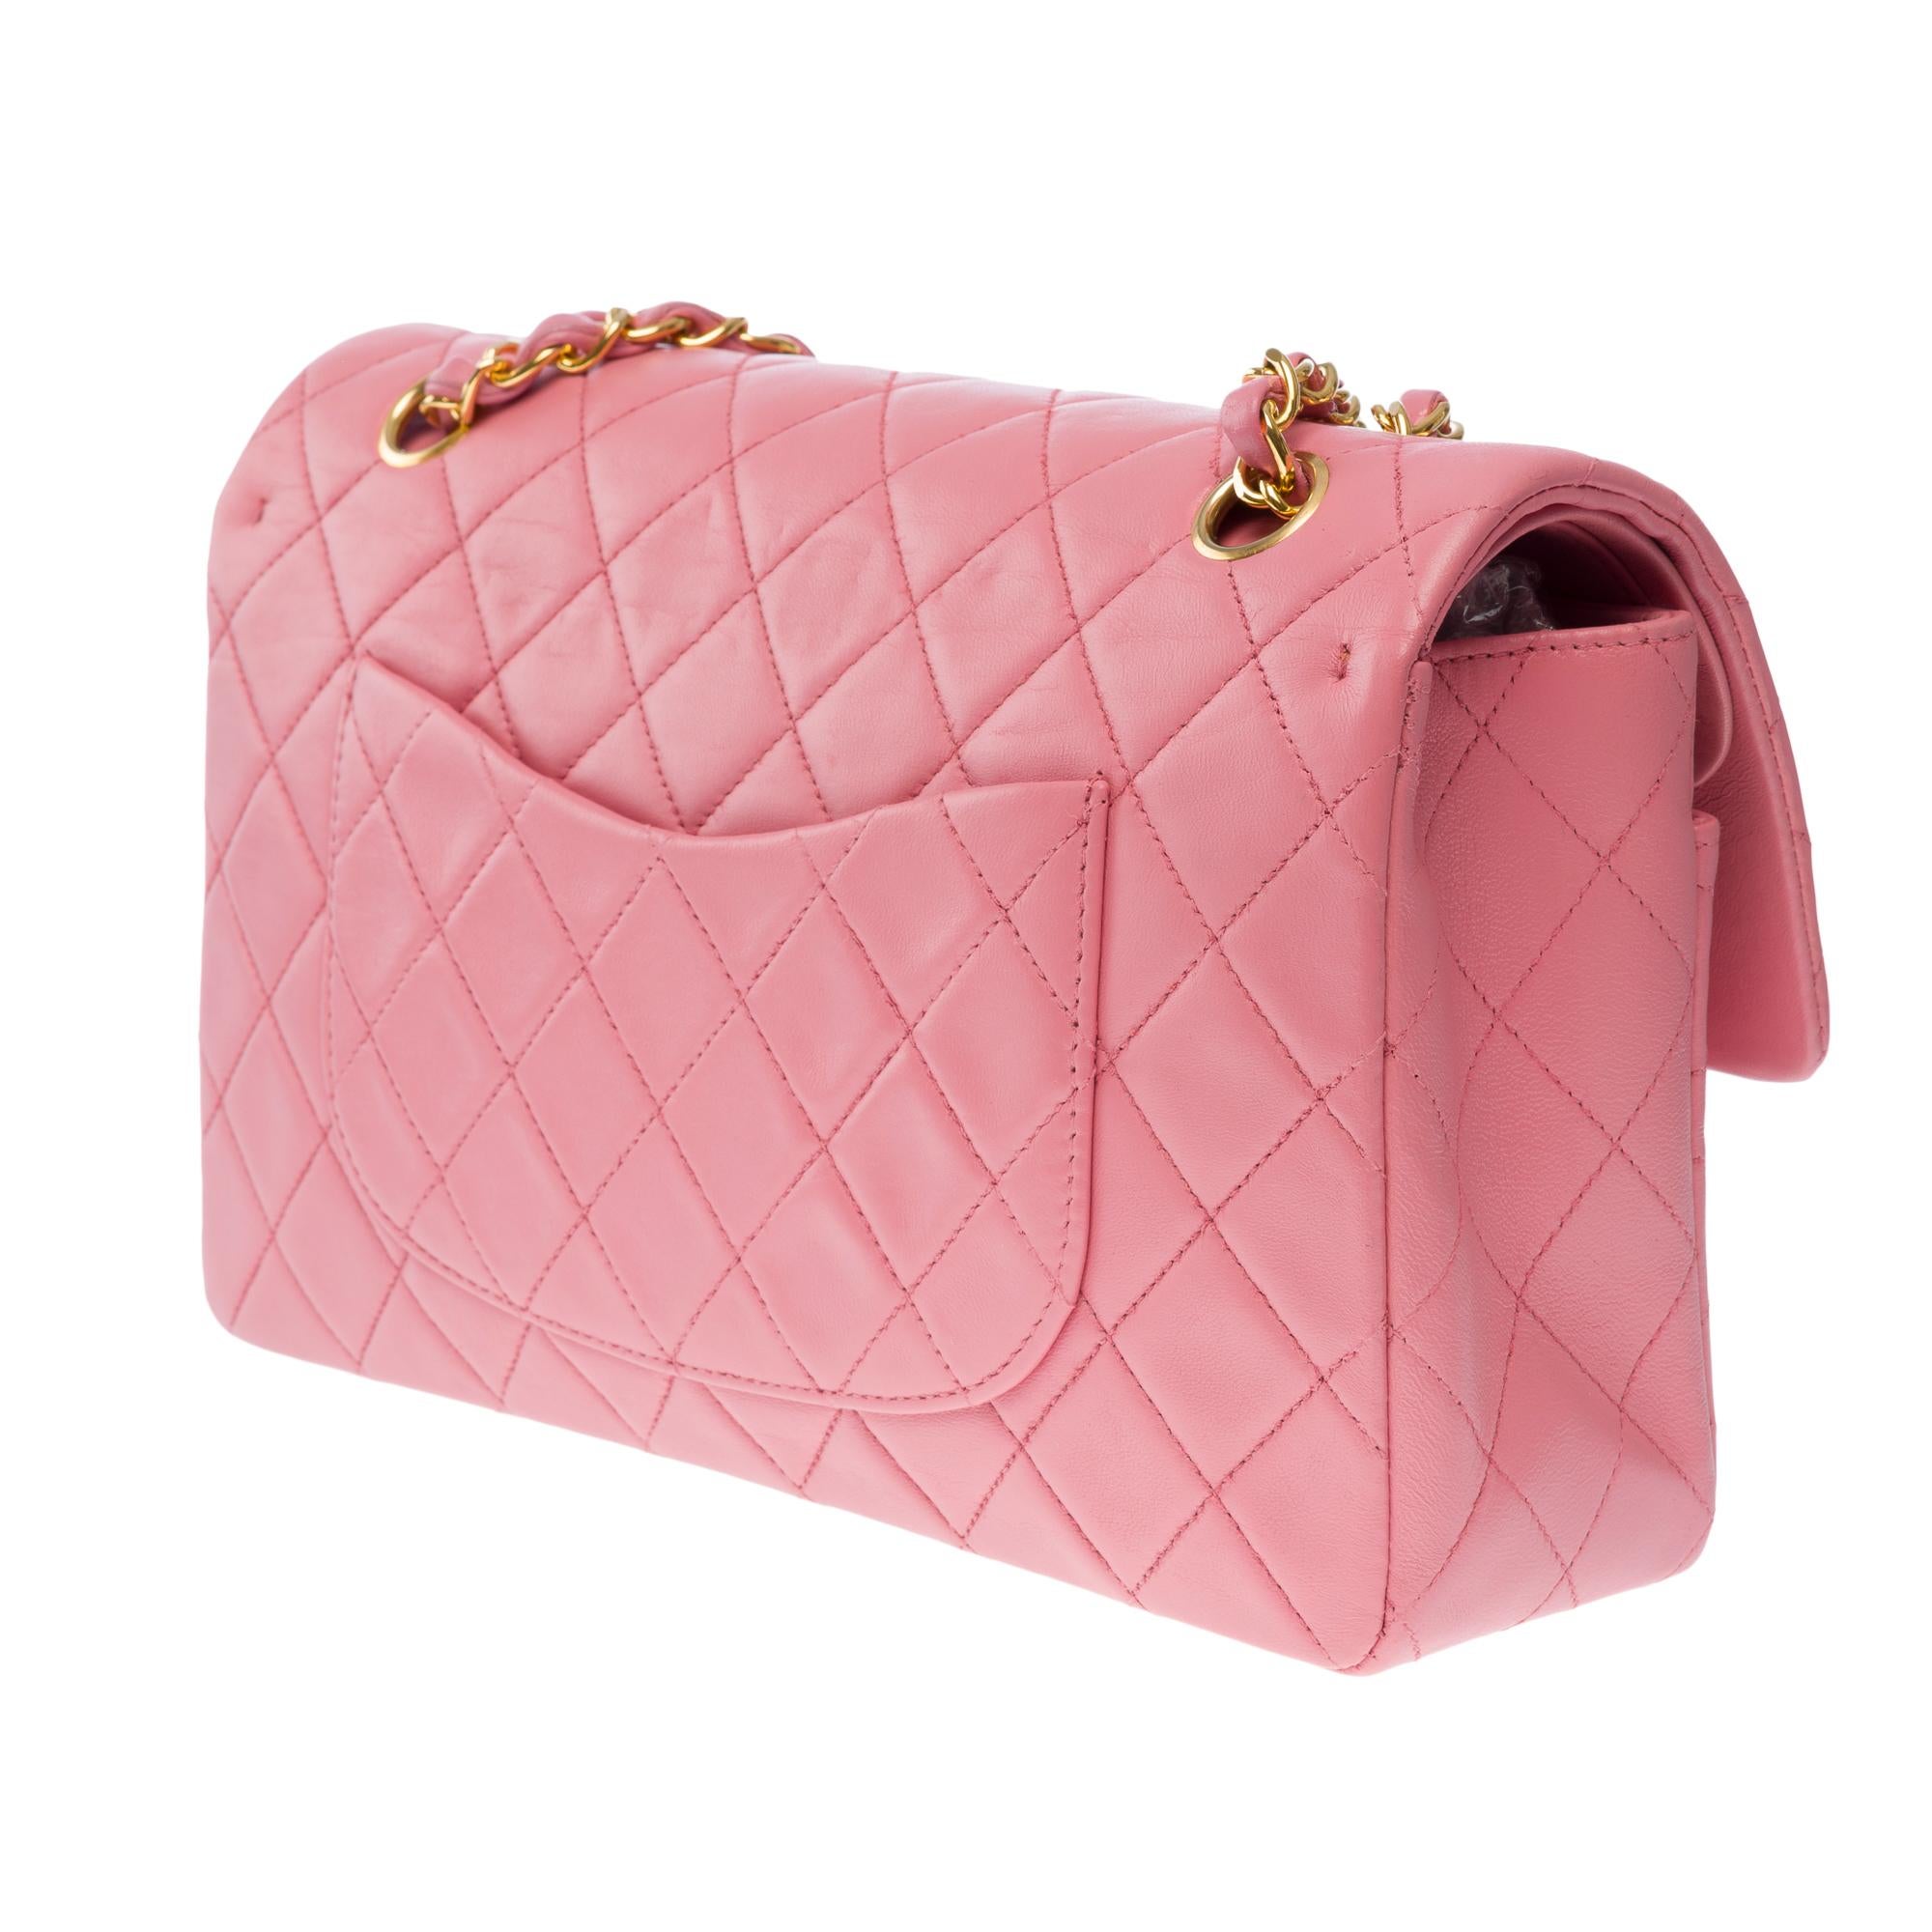 Chanel Timeless Medium double Flap shoulder bag in Pink quilted lambskin, GHW 3